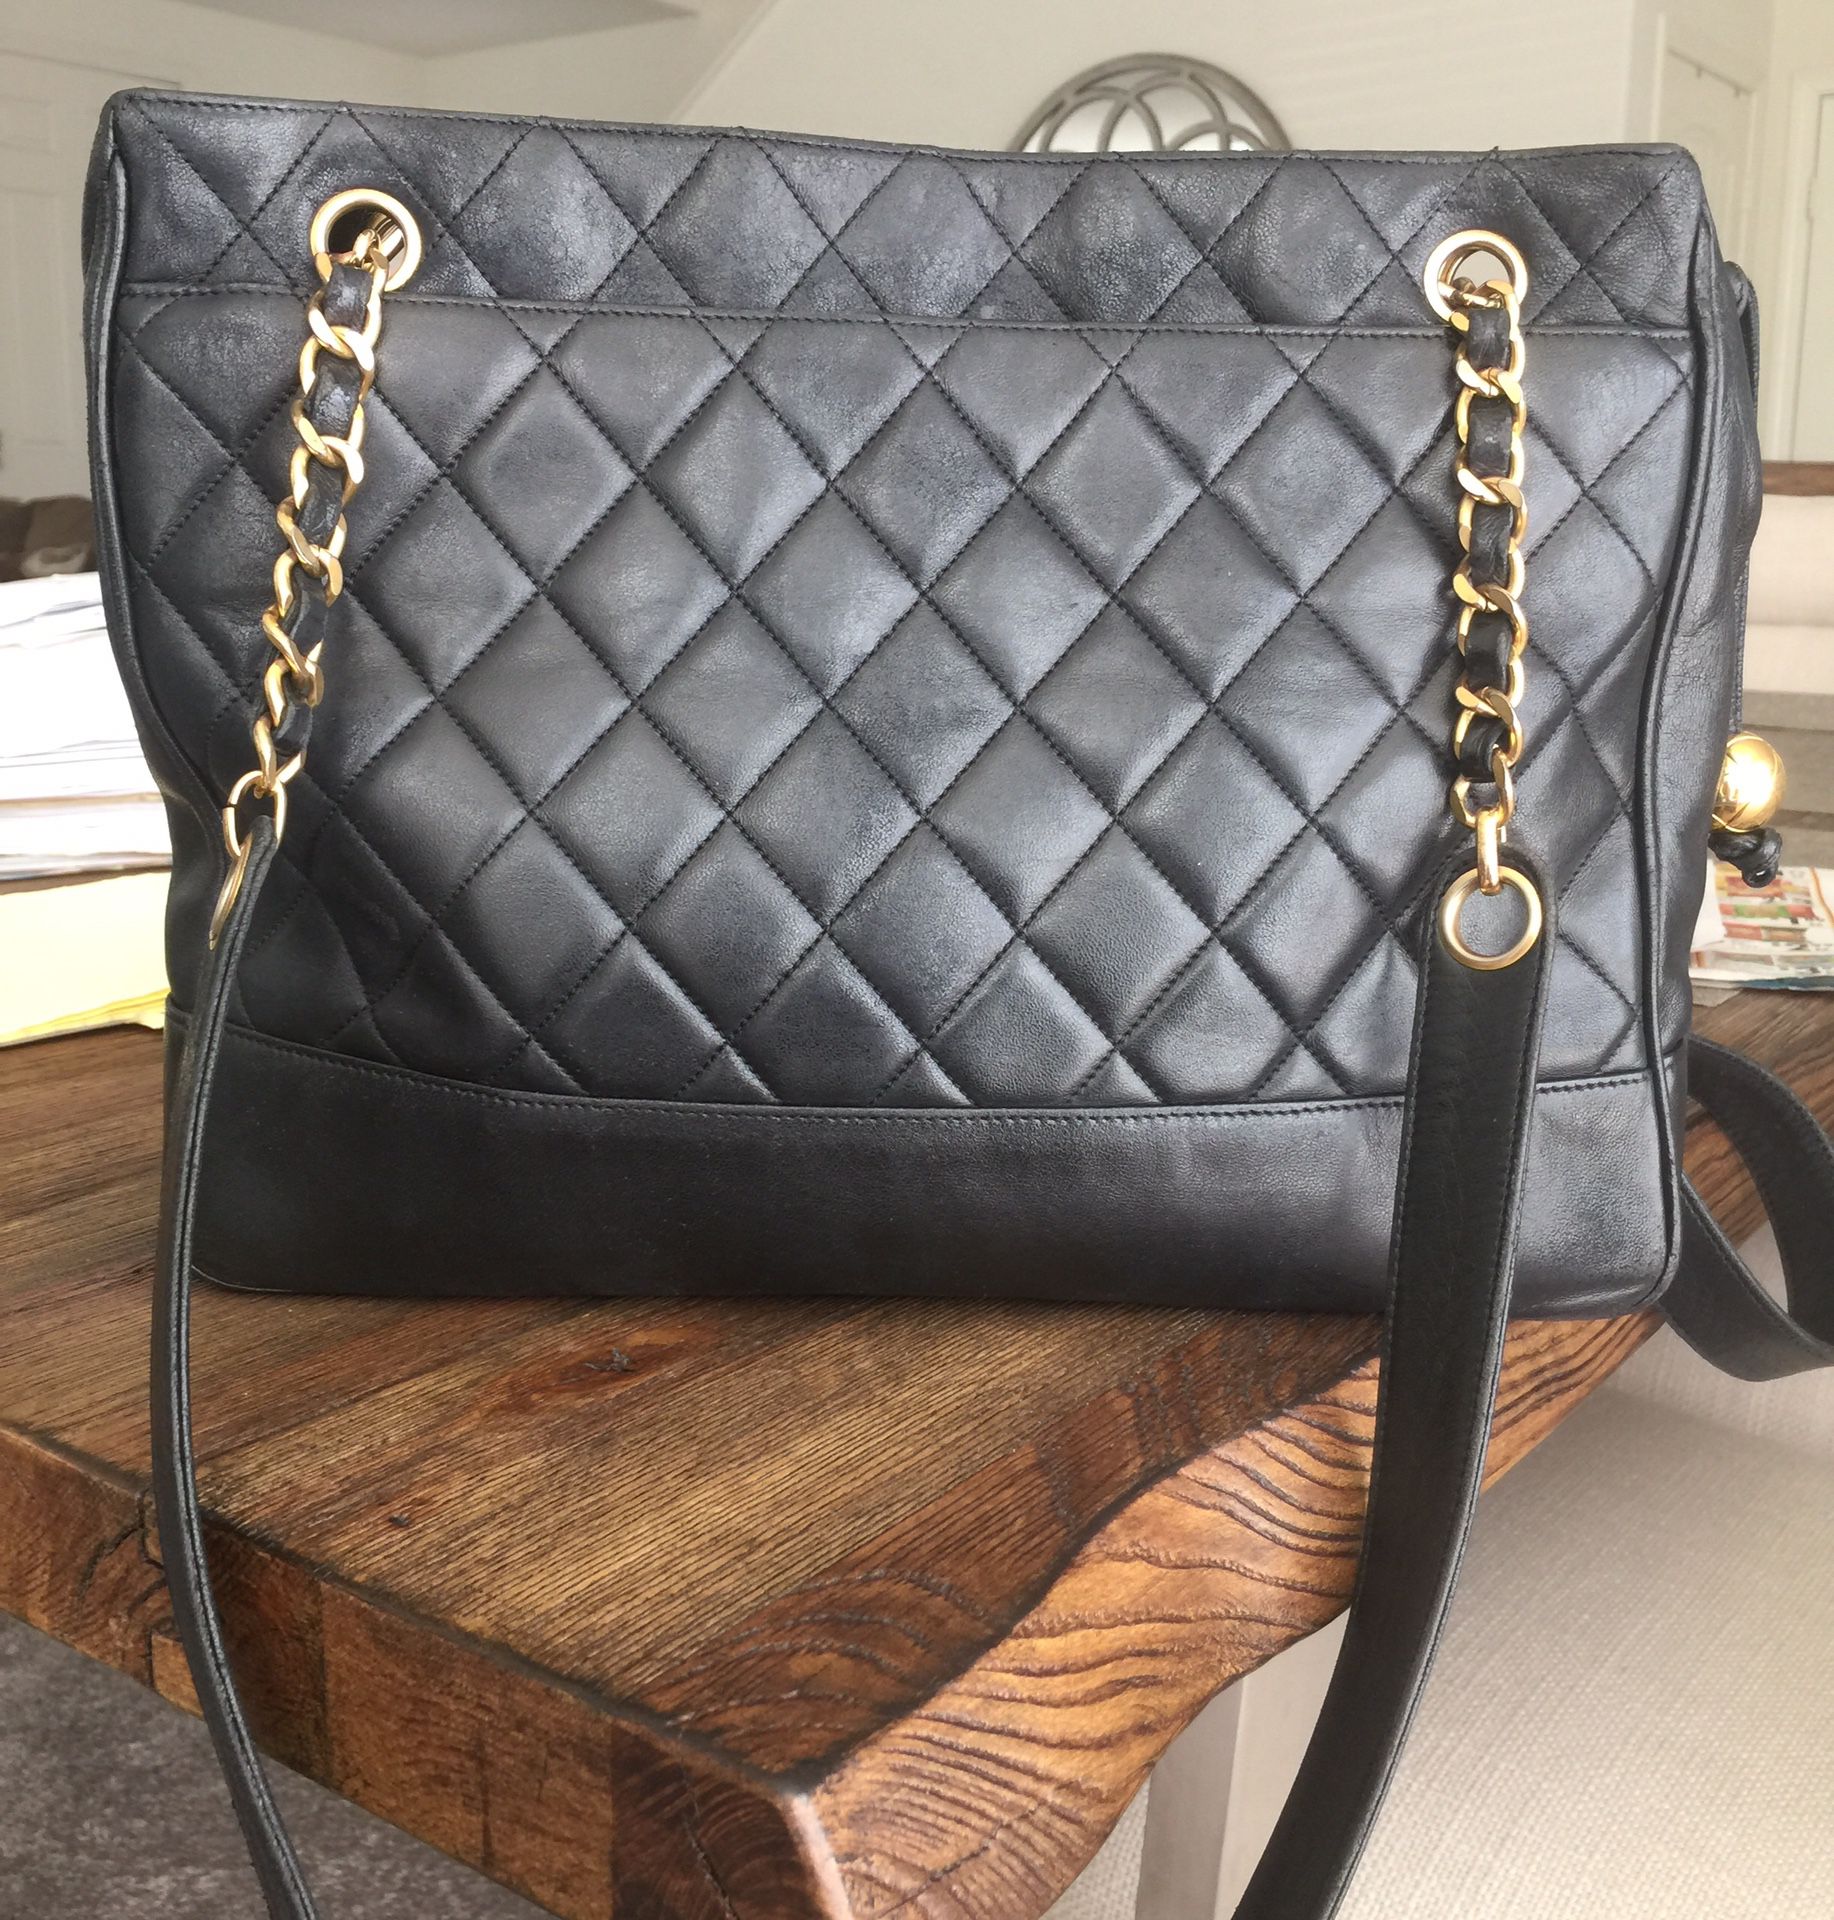 Auth CHANEL Quilted Matelasse Chain Shoulder bag